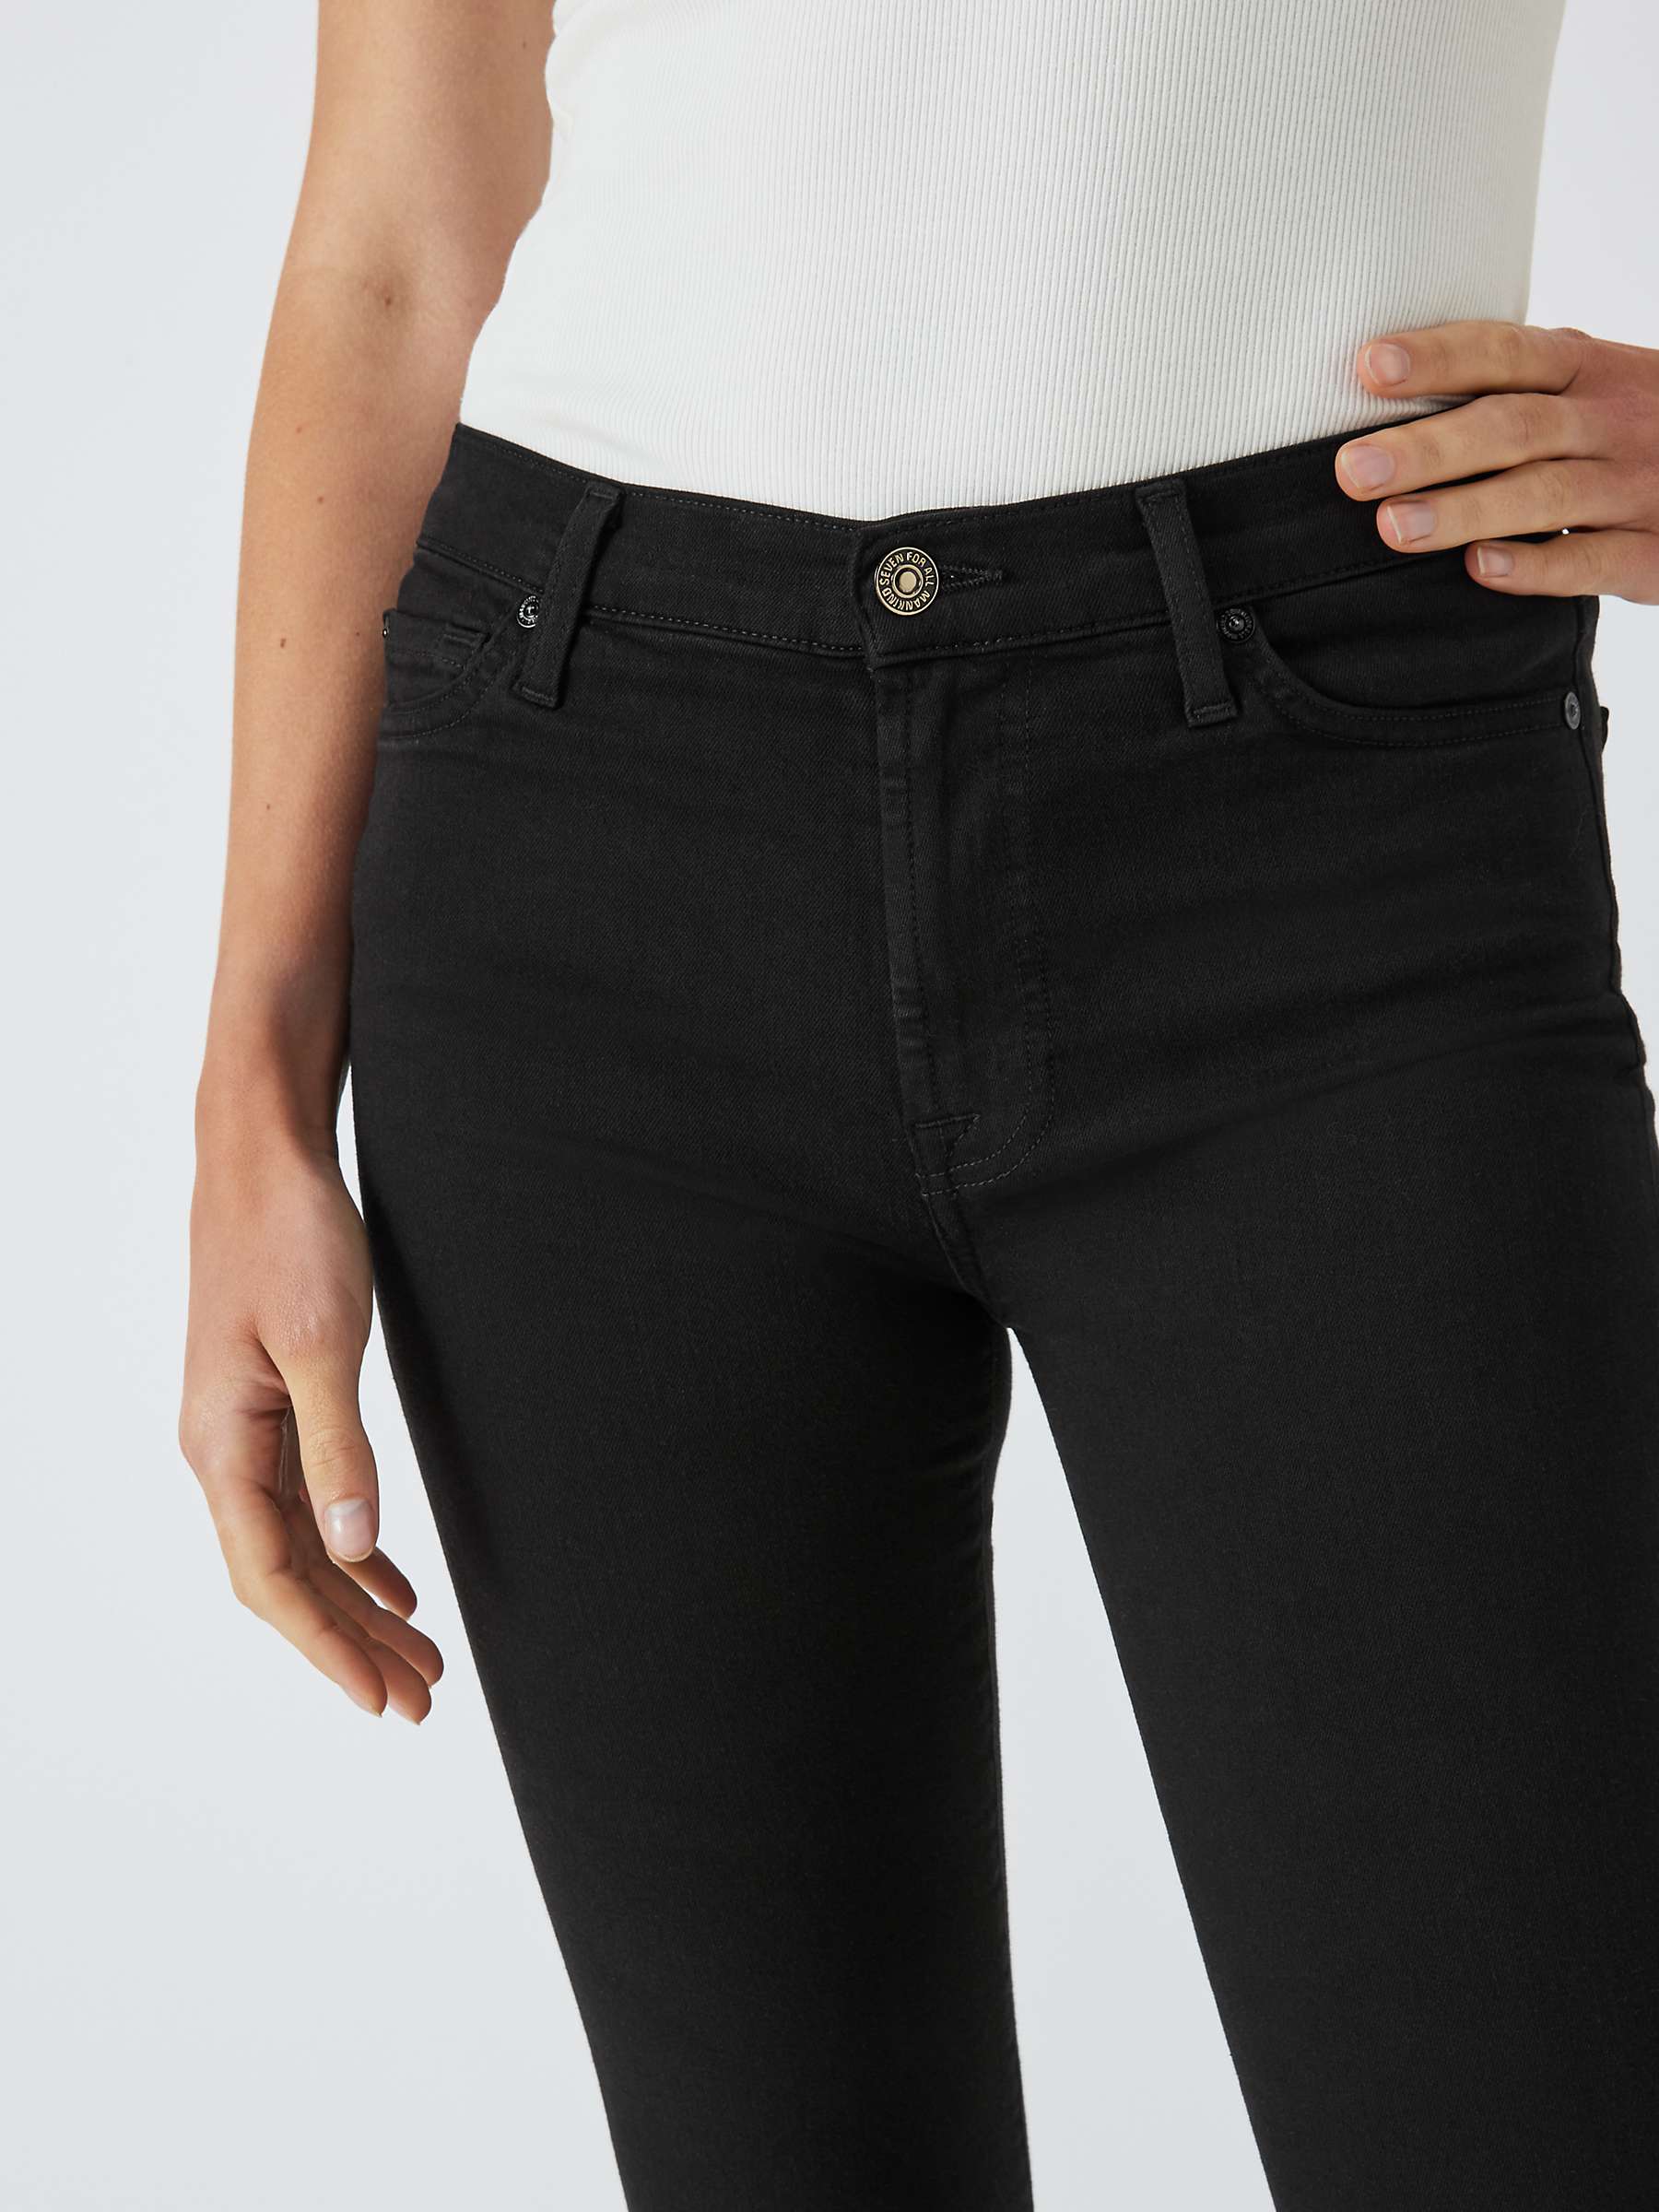 Buy 7 For All Mankind Skinny Slim Illusion Luxe Jeans, Rinse Black Online at johnlewis.com